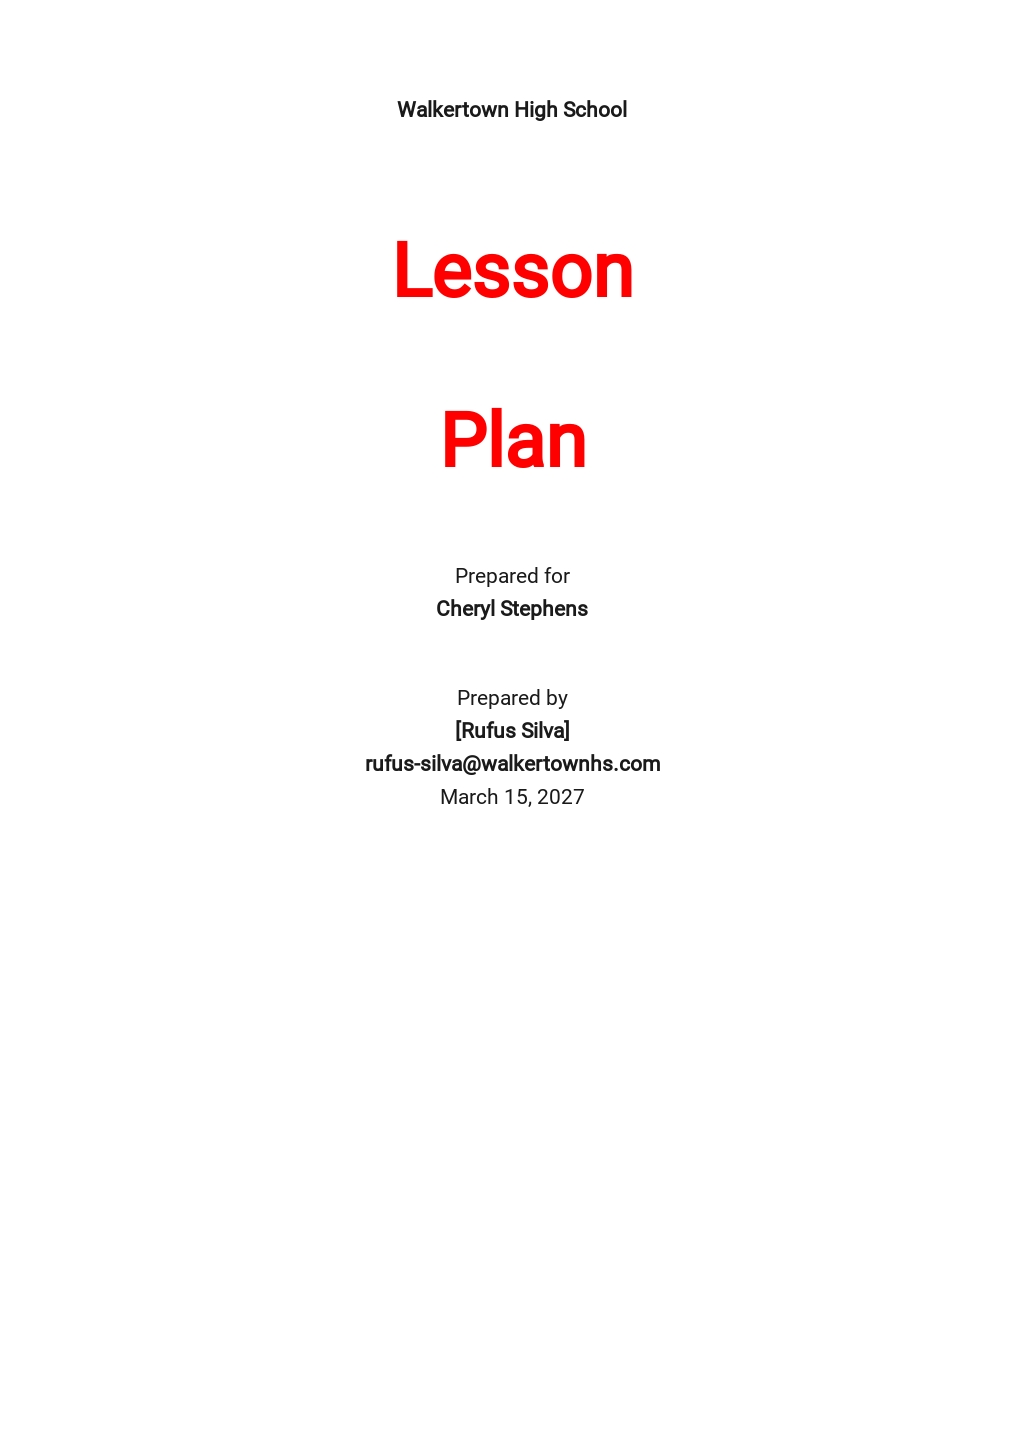 Physical Education Lesson Plan Template.jpe